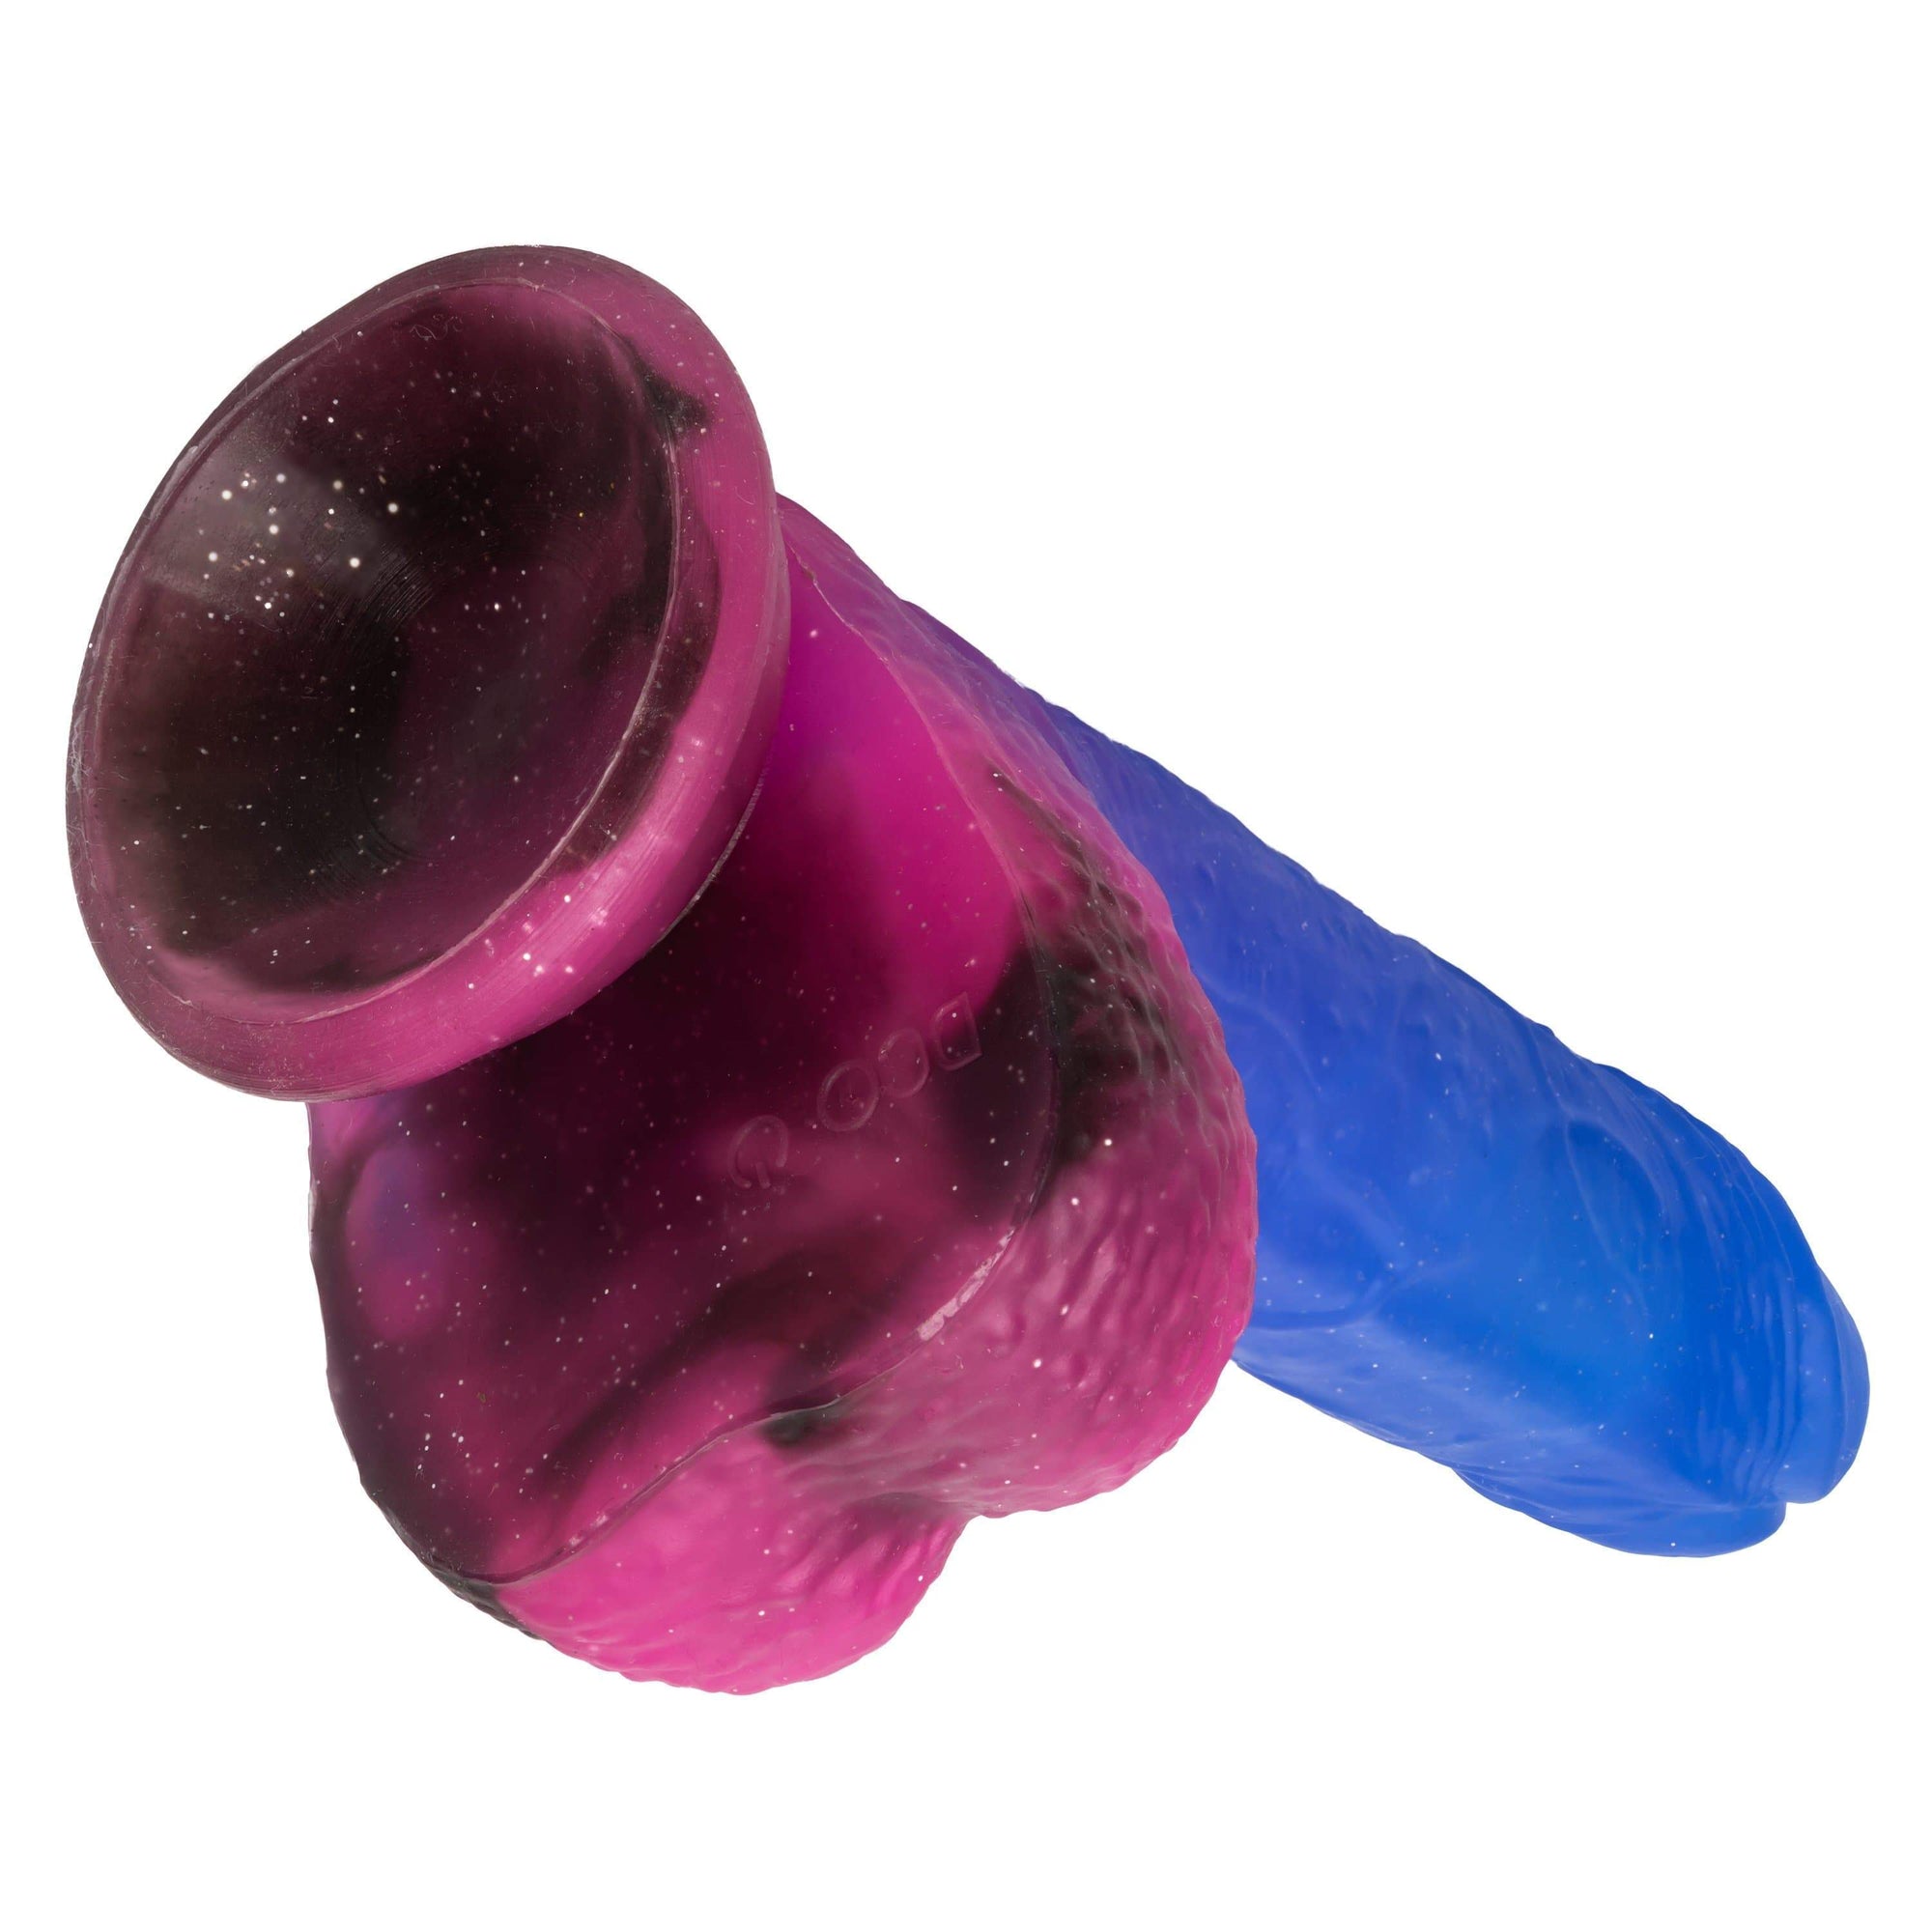 California Exotics - Naughty Bits Ombre Hombre Vibrating Dildo (Purple) Realistic Dildo with suction cup (Vibration) Rechargeable 716770094421 CherryAffairs